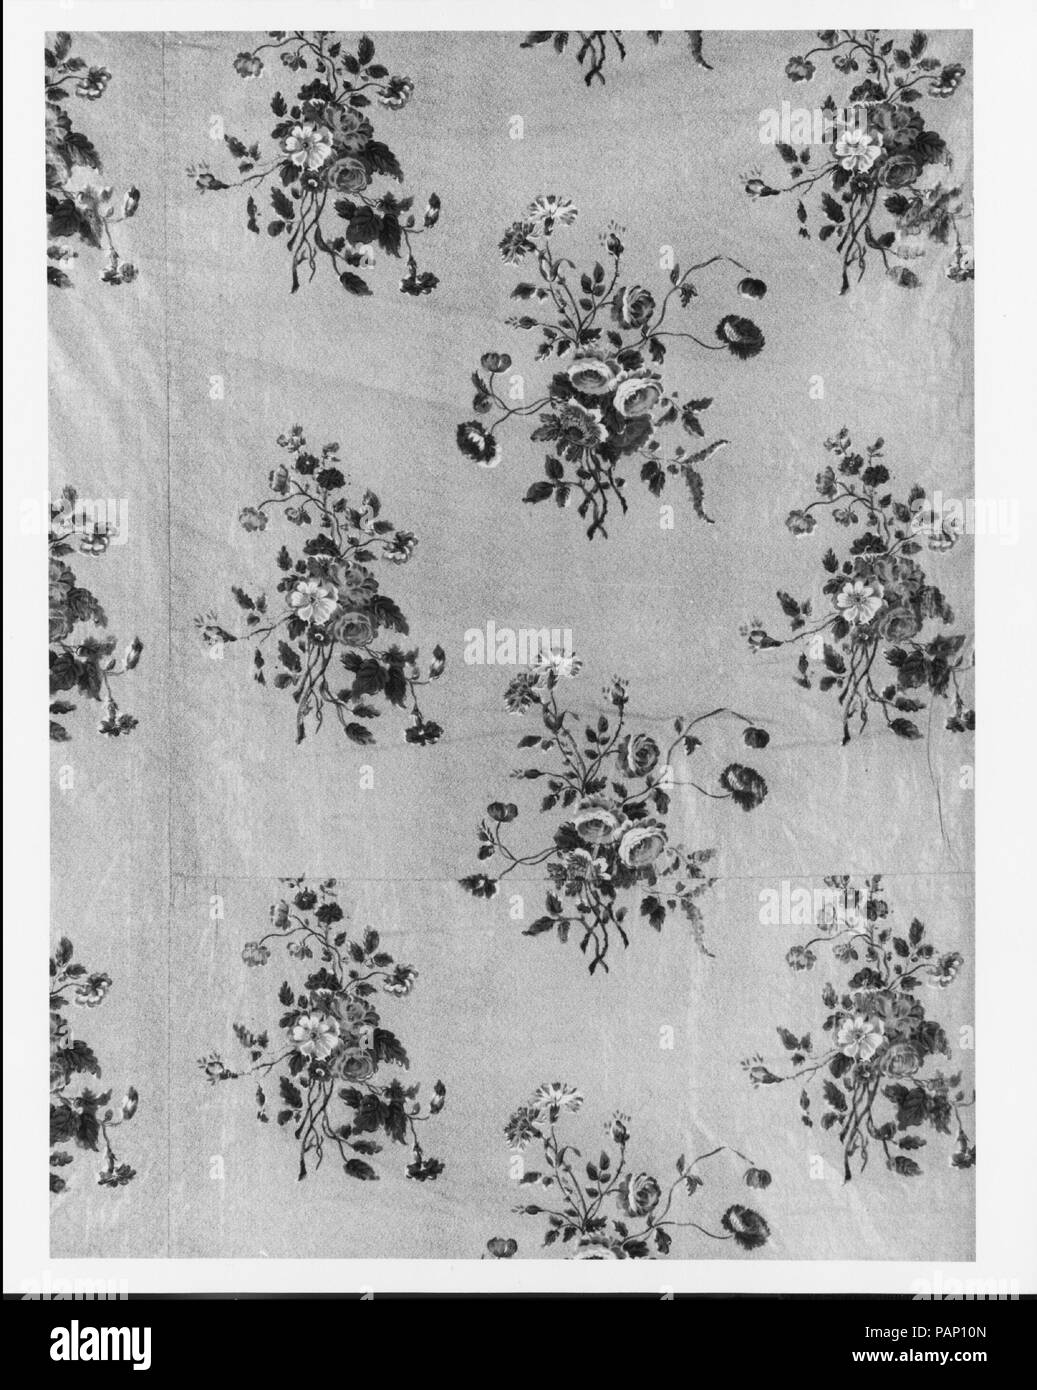 Wholecloth coverlet. Culture: American or British. Dimensions: 93 1/2 x 82 1/4 in. (237.5 x 208.9 cm). Date: ca. 1830.  The coverlet top is of a glazed floral chintz; it has a beige ground printed with red, blue, and yellow flowers and green foliage. The back is randomly pieced of two chintzes and two brown and red calicos. A piece of the same chintz used for the top is pieced into the back and is inscribed with the fabric printer's name. The edges of the top and back are bound together with striped tape. The coverlet has no batting between the top and back layers and is not quilted. Museum: M Stock Photo